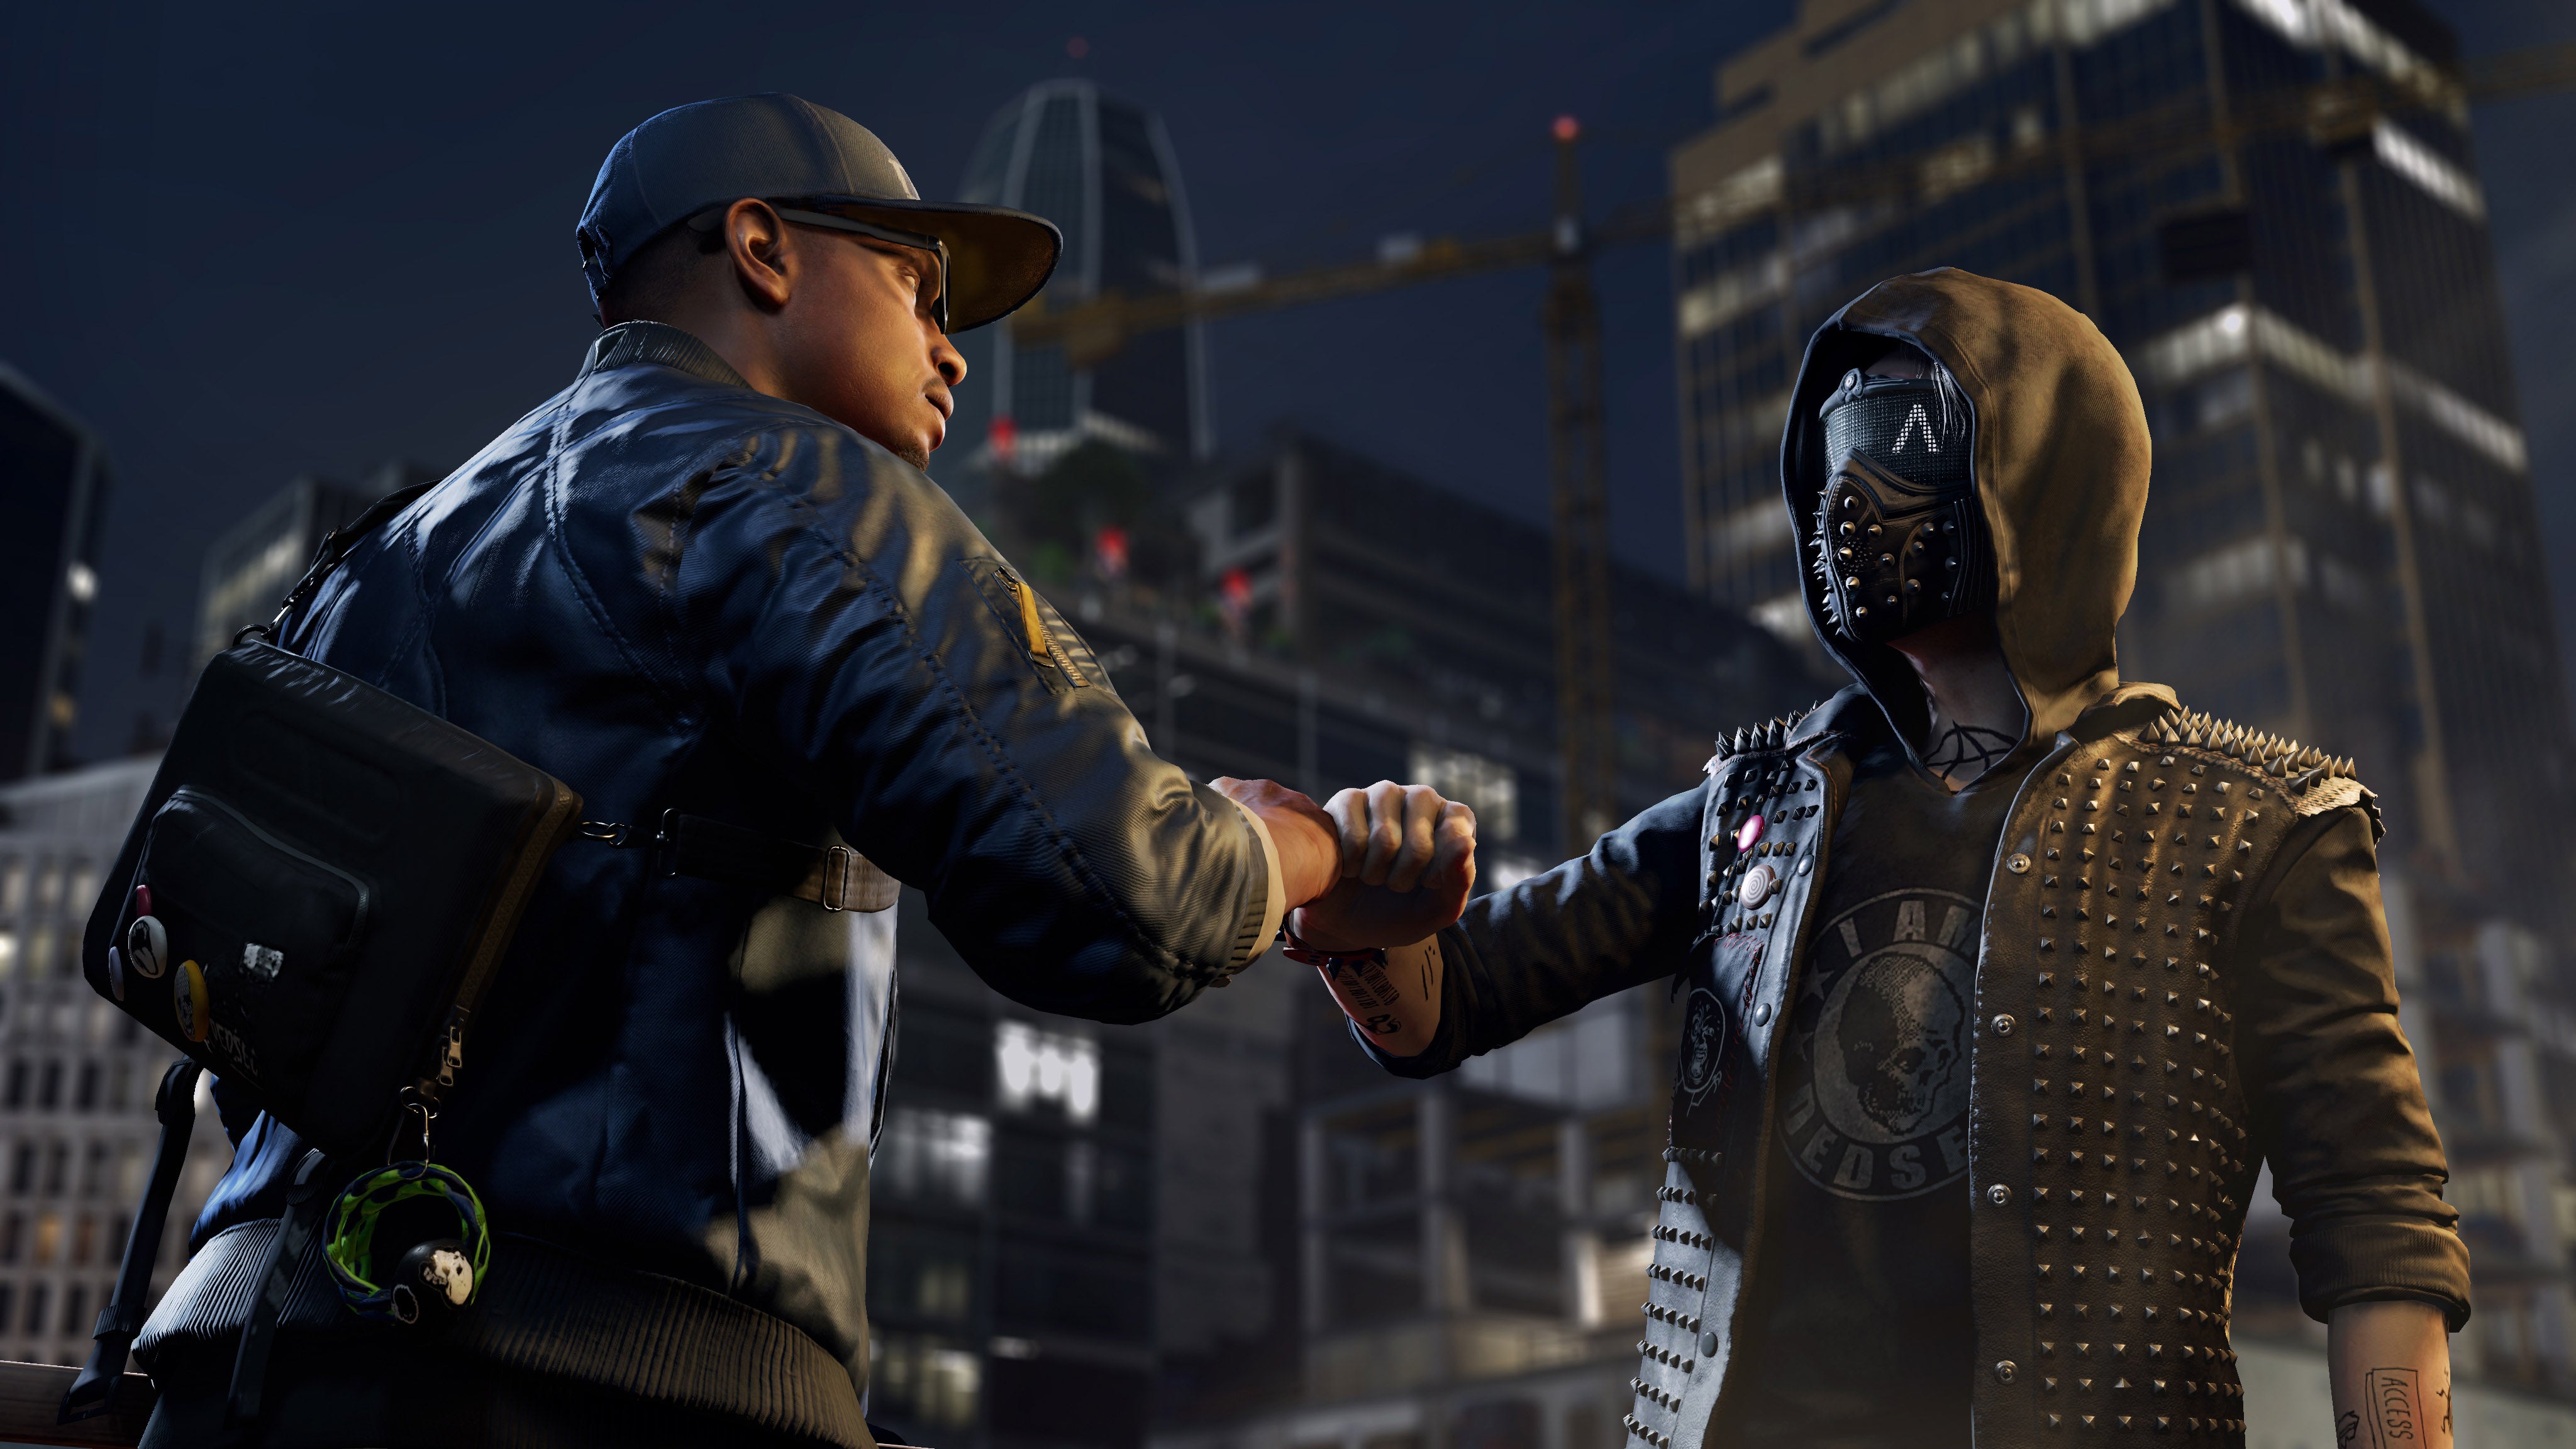 Image for We're livestreaming some Watch Dogs 2 gameplay - come join us